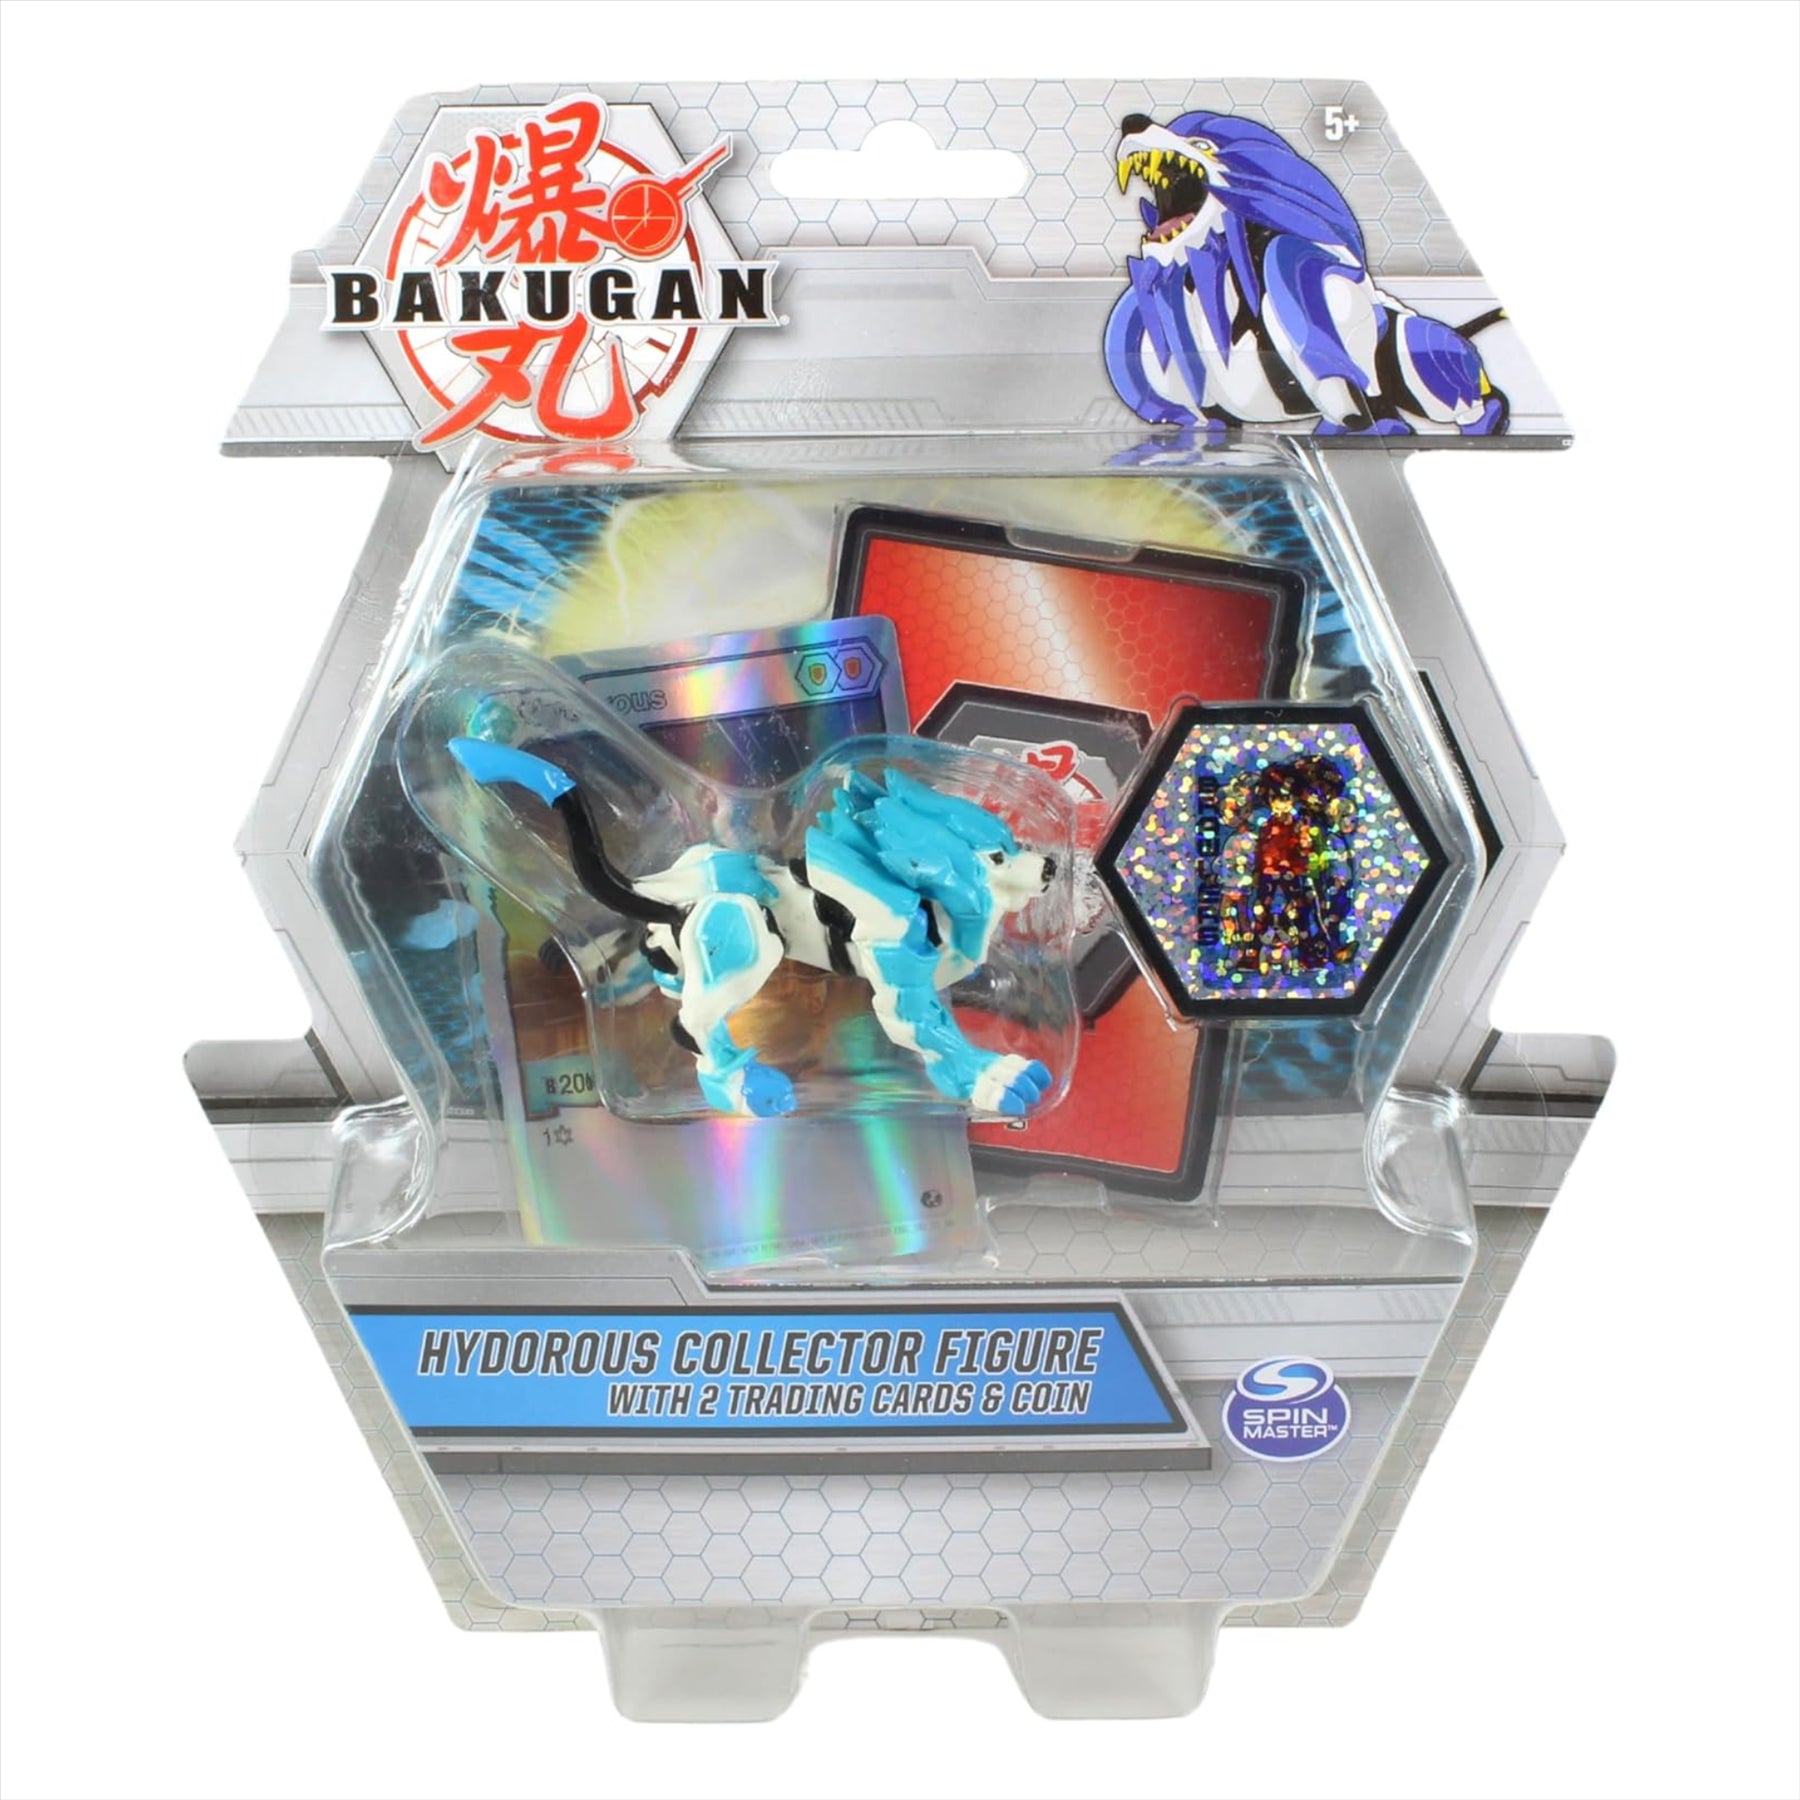 BAKUGAN - Hydorous Blue Collector Figure With 2 Trading Cards & Collectors Coin - Toptoys2u